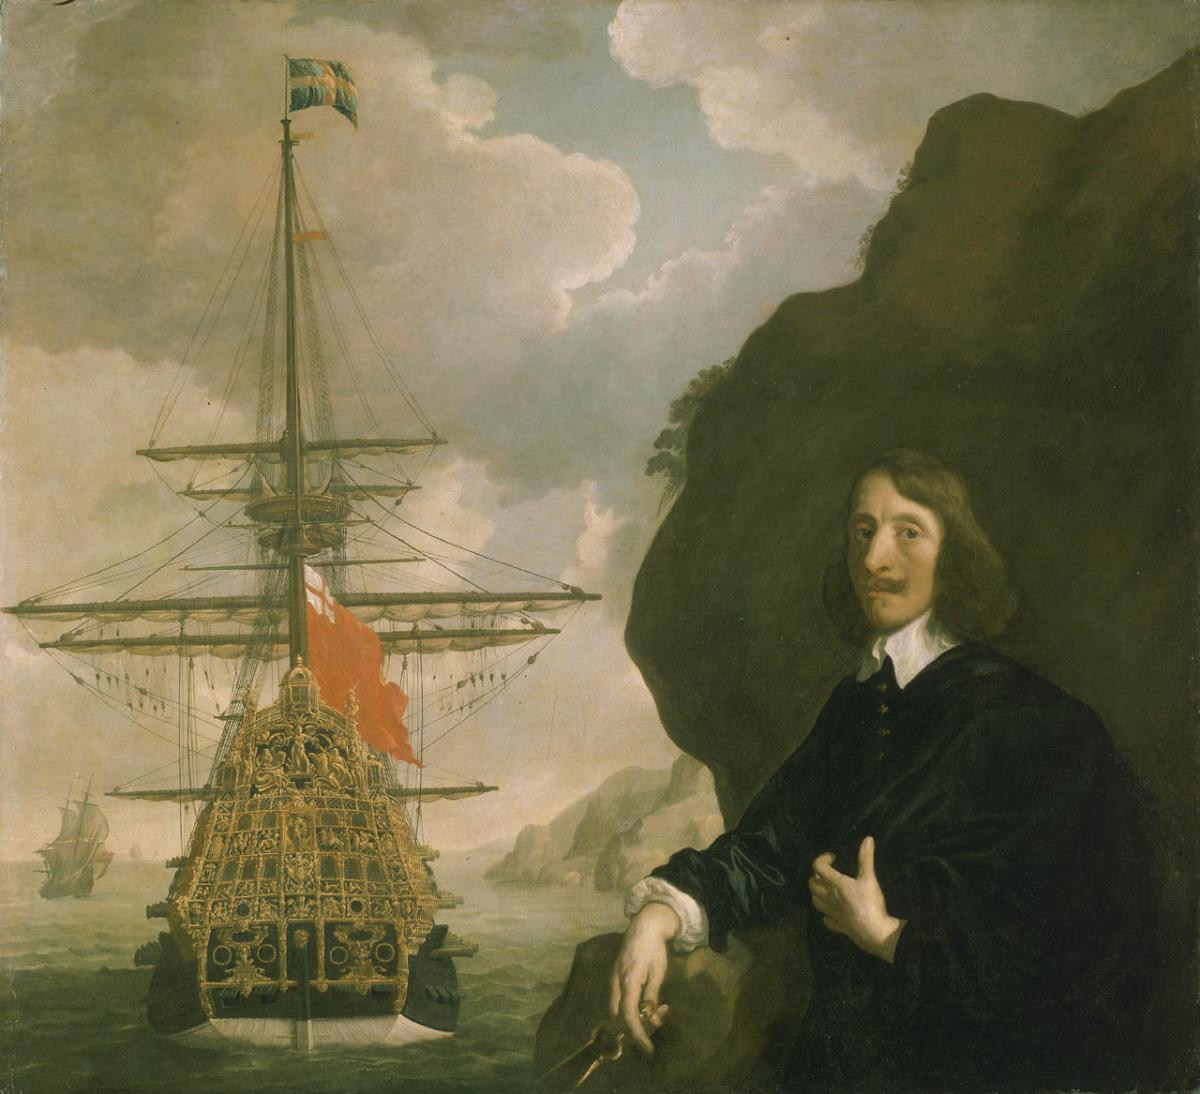 A man stands next to a ship with a golden stern